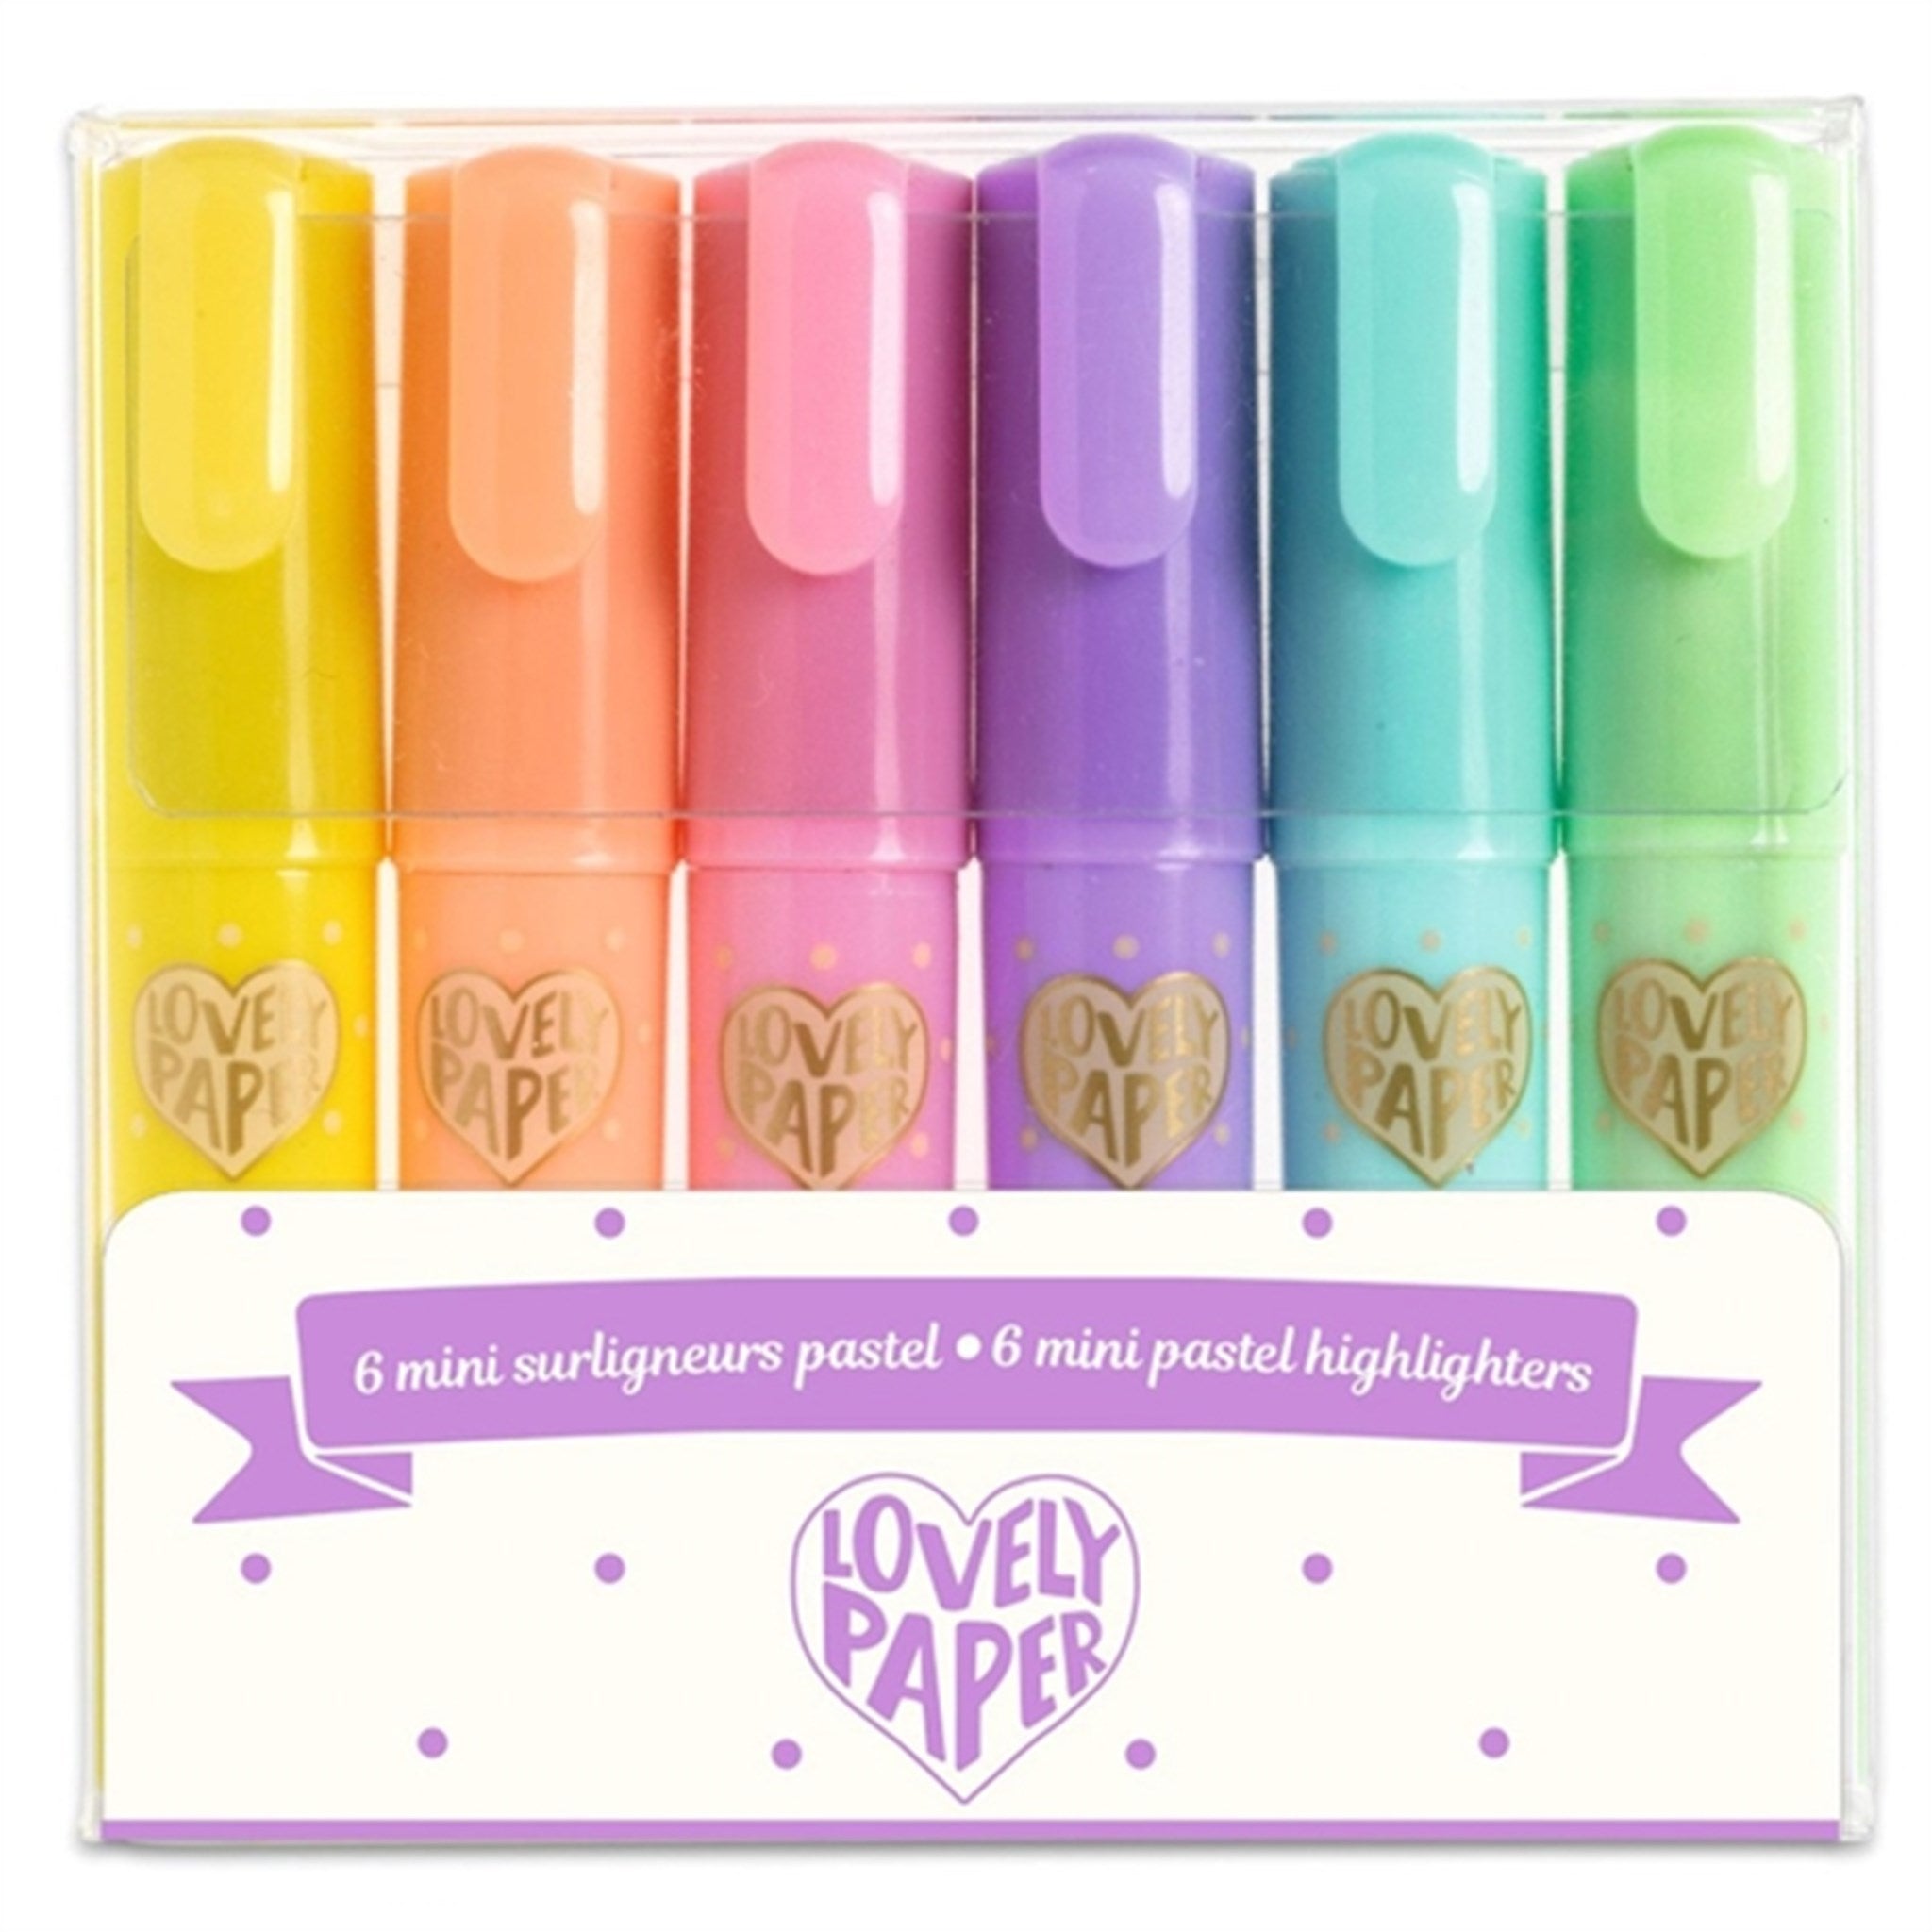 Djeco Lovely Paper 6 Mini Pastell Highlighters